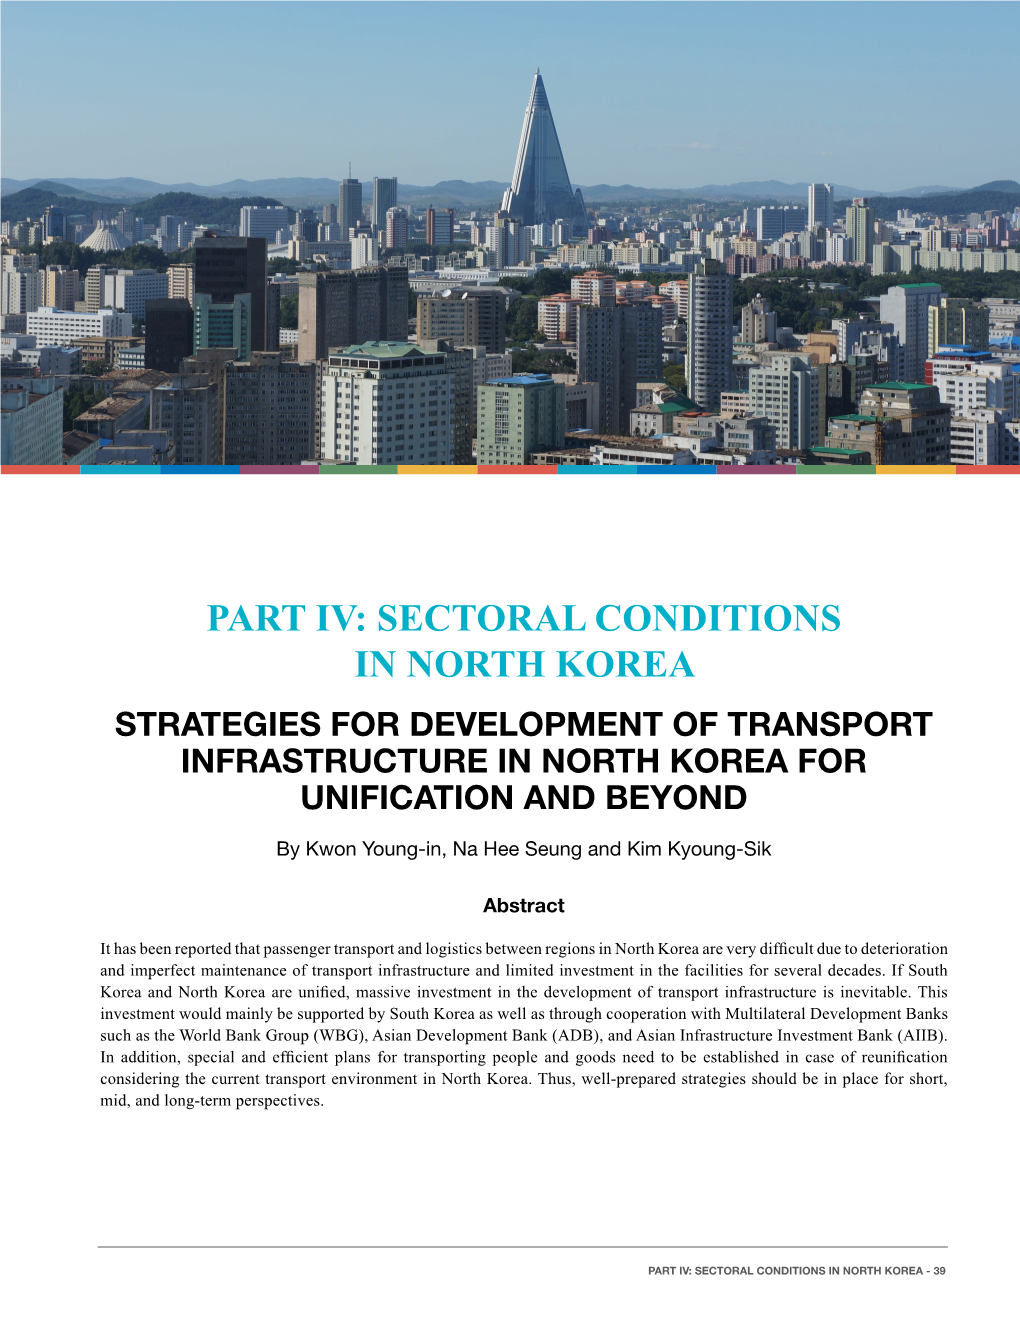 Sectoral Conditions in North Korea Strategies for Development of Transport Infrastructure in North Korea for Unification and Beyond